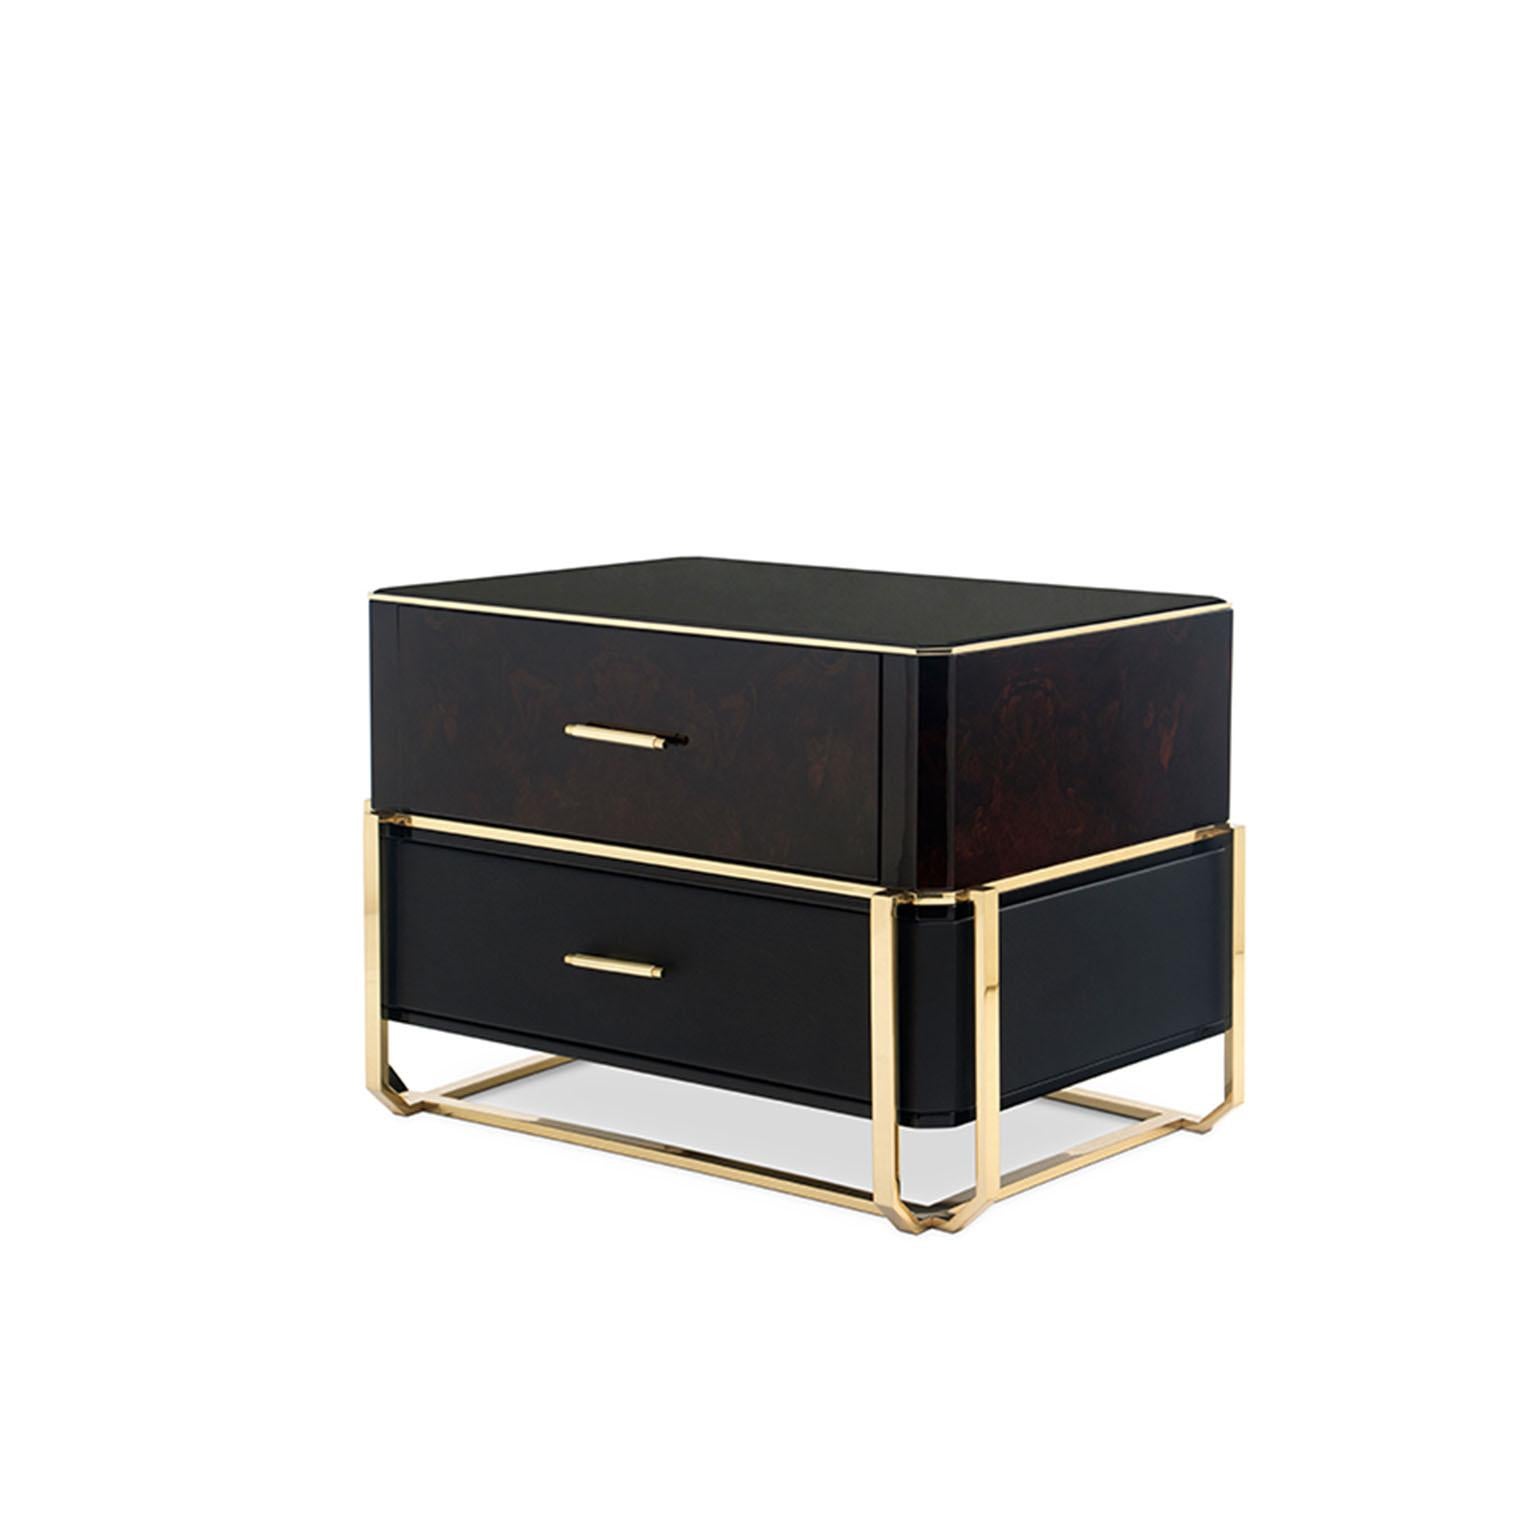 Honoring a refined and unmistakable character that seduces by the beauty of its contrasts, the Waltz nightstand was born. Transpiring elegance, sobriety, and decisiveness, the high material quality dismisses the ordinary to create exclusive and